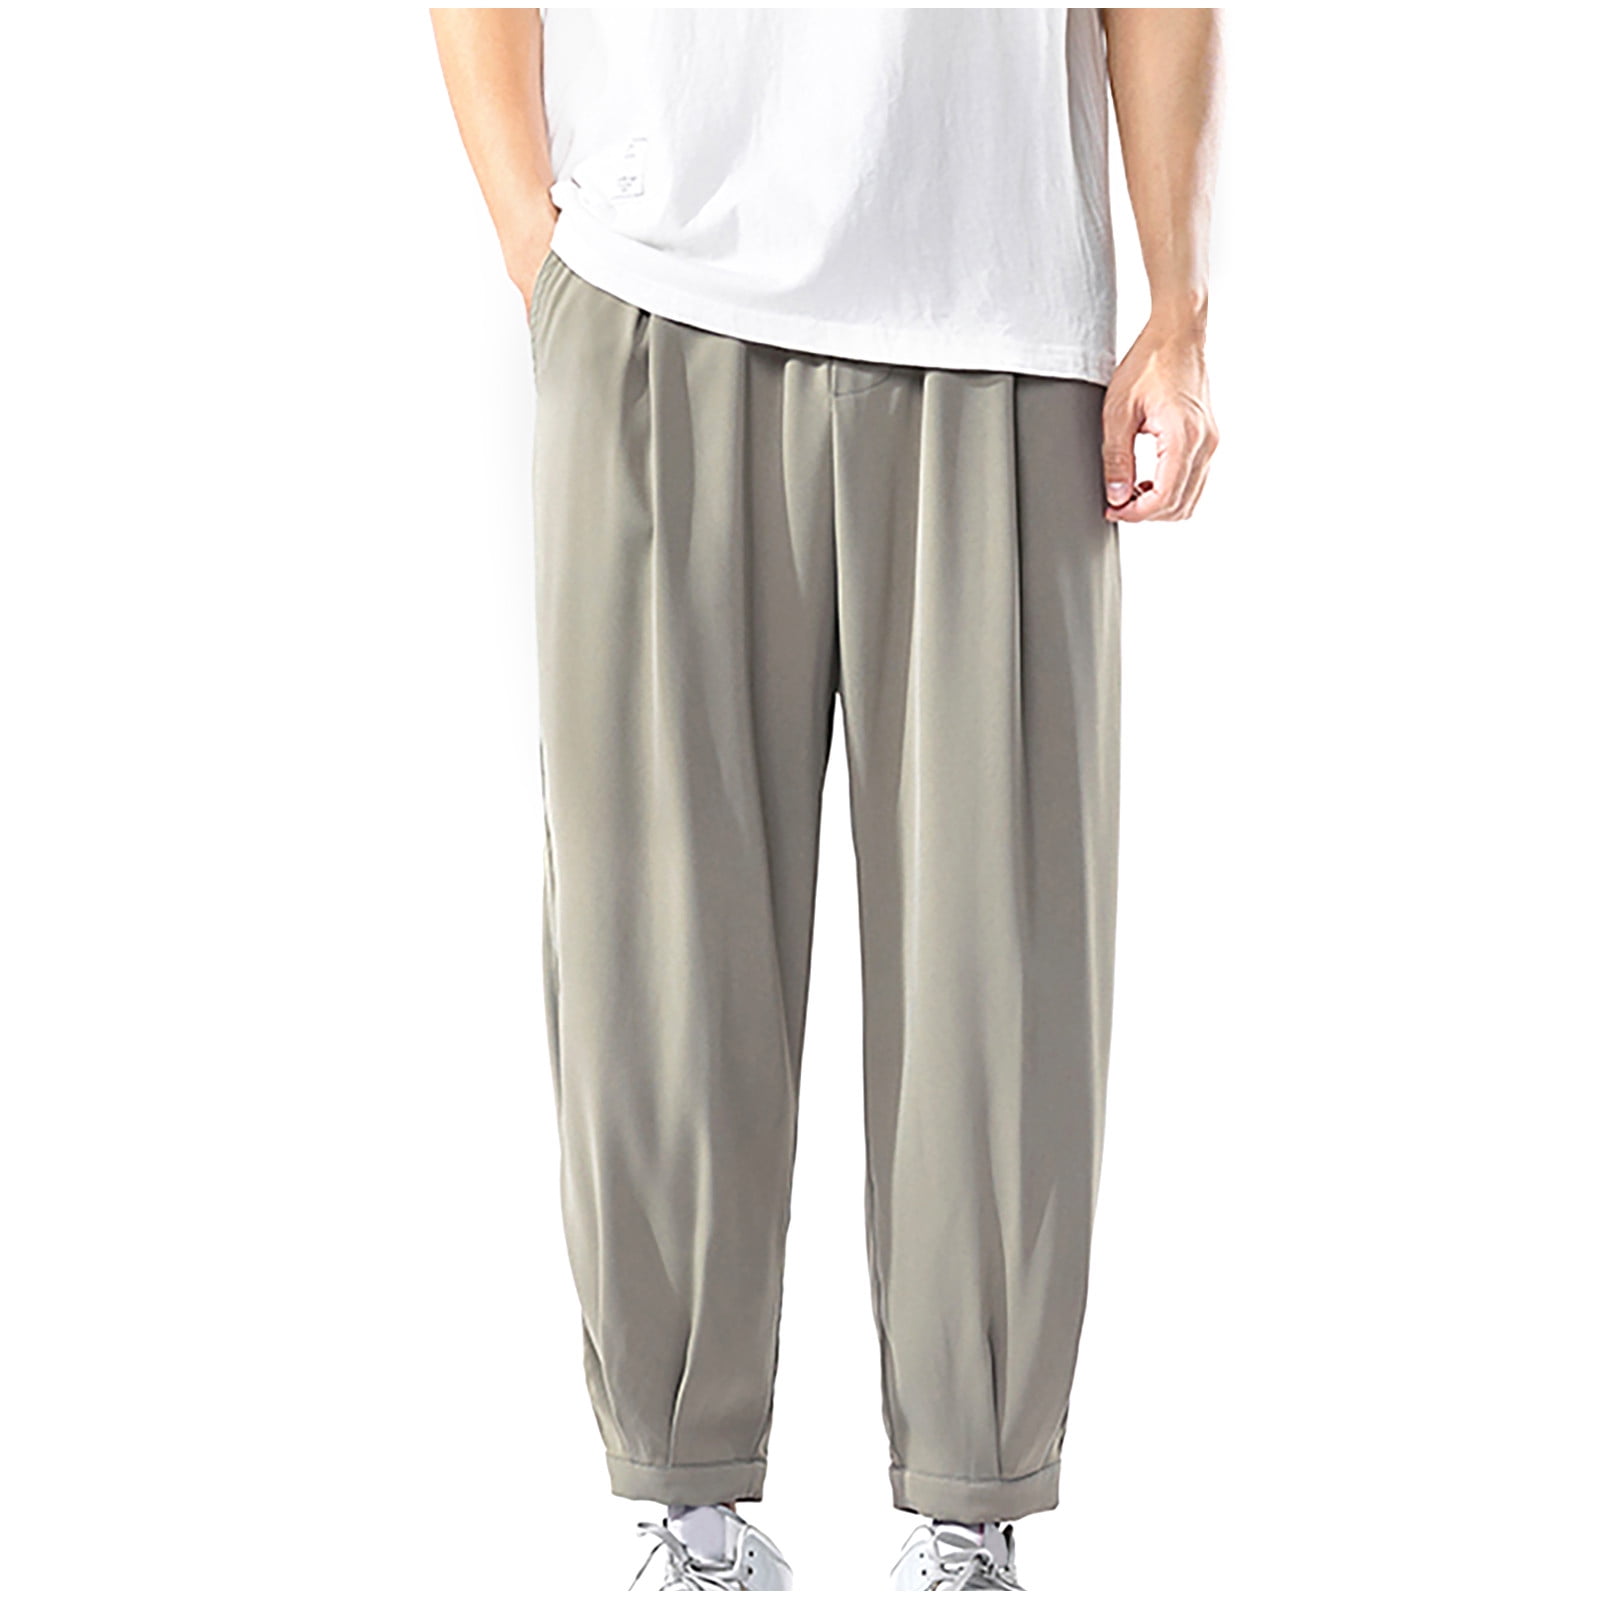 Korean Baggy Loose Fit Pants For Men – Offduty India